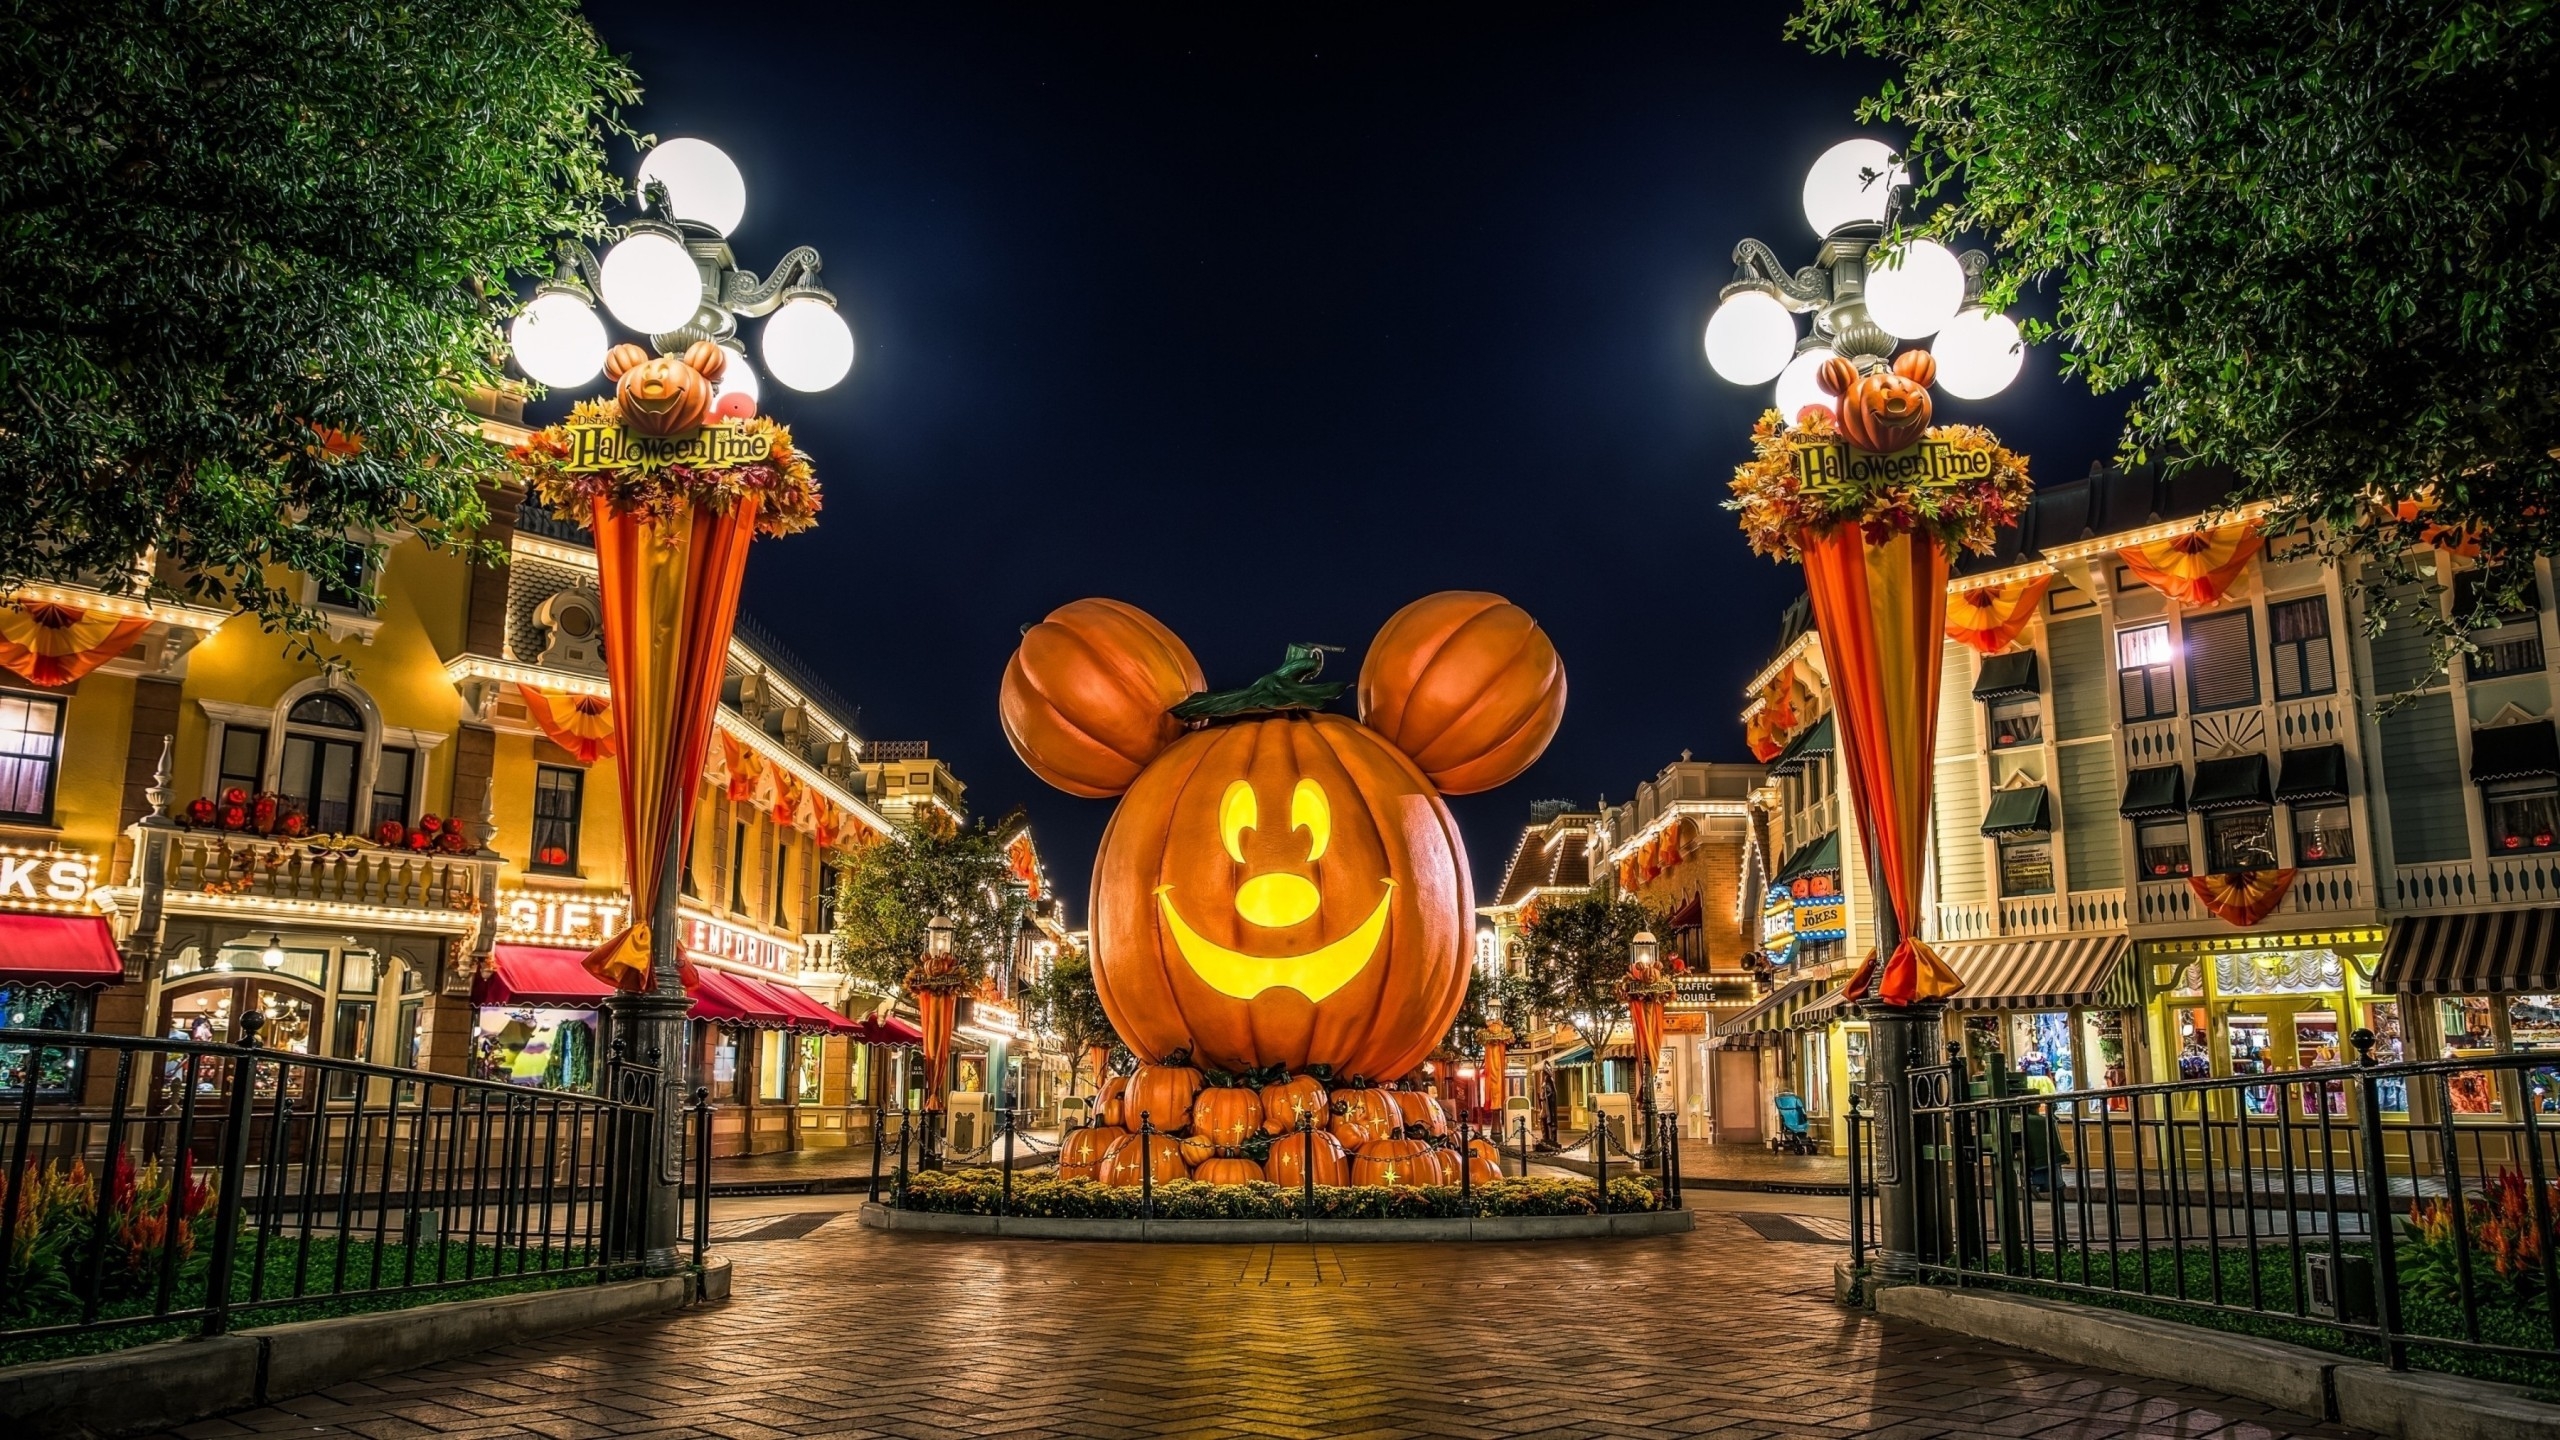 Mickey Mouse Pumpkin for 2560x1440 HDTV resolution